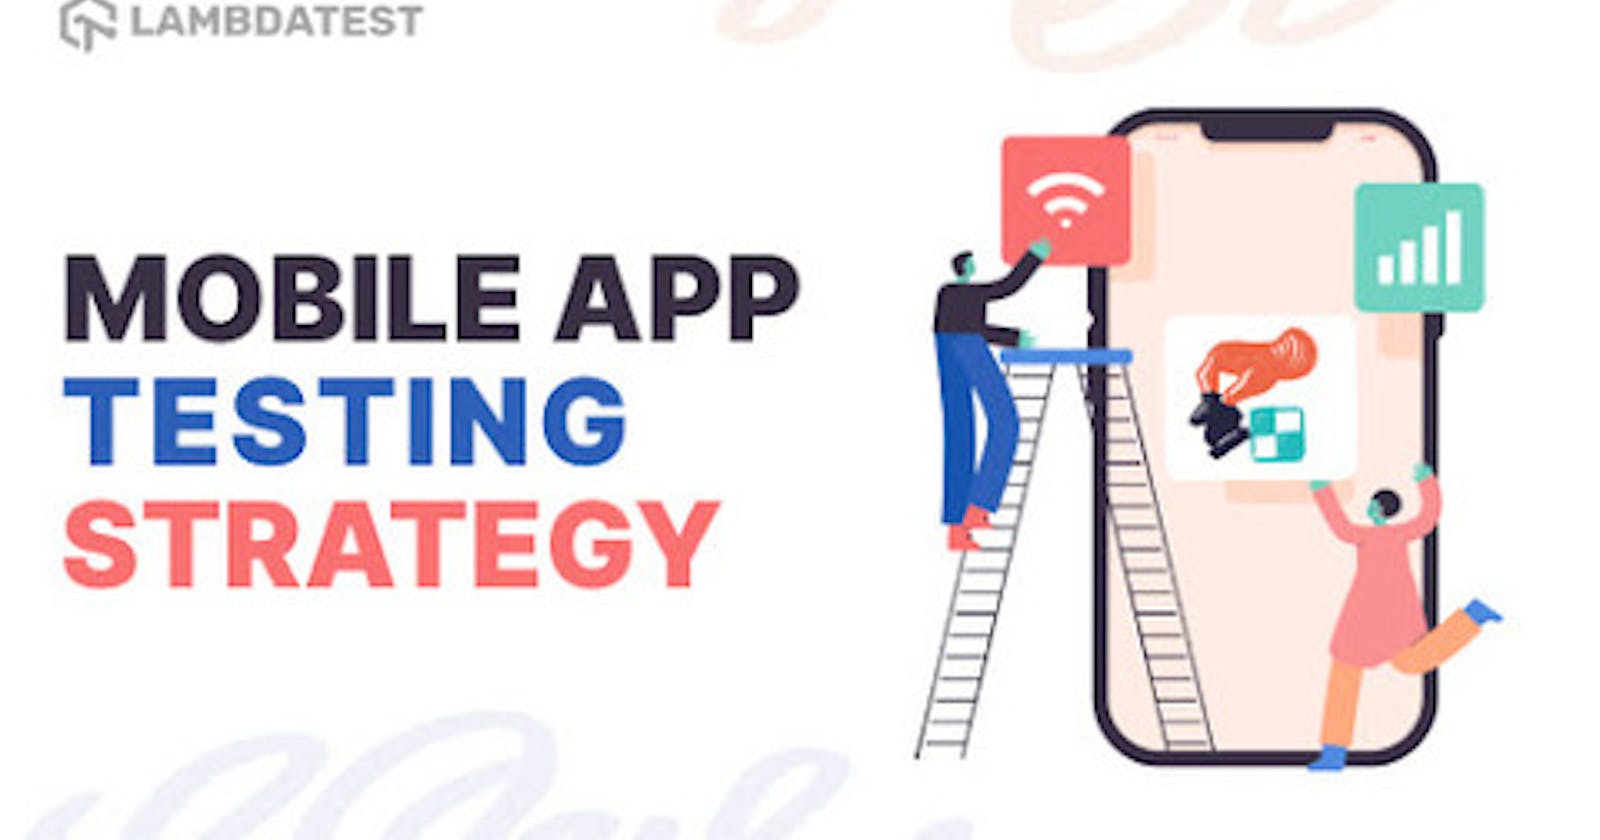 Getting Your Mobile App Testing Strategy Right The First Time